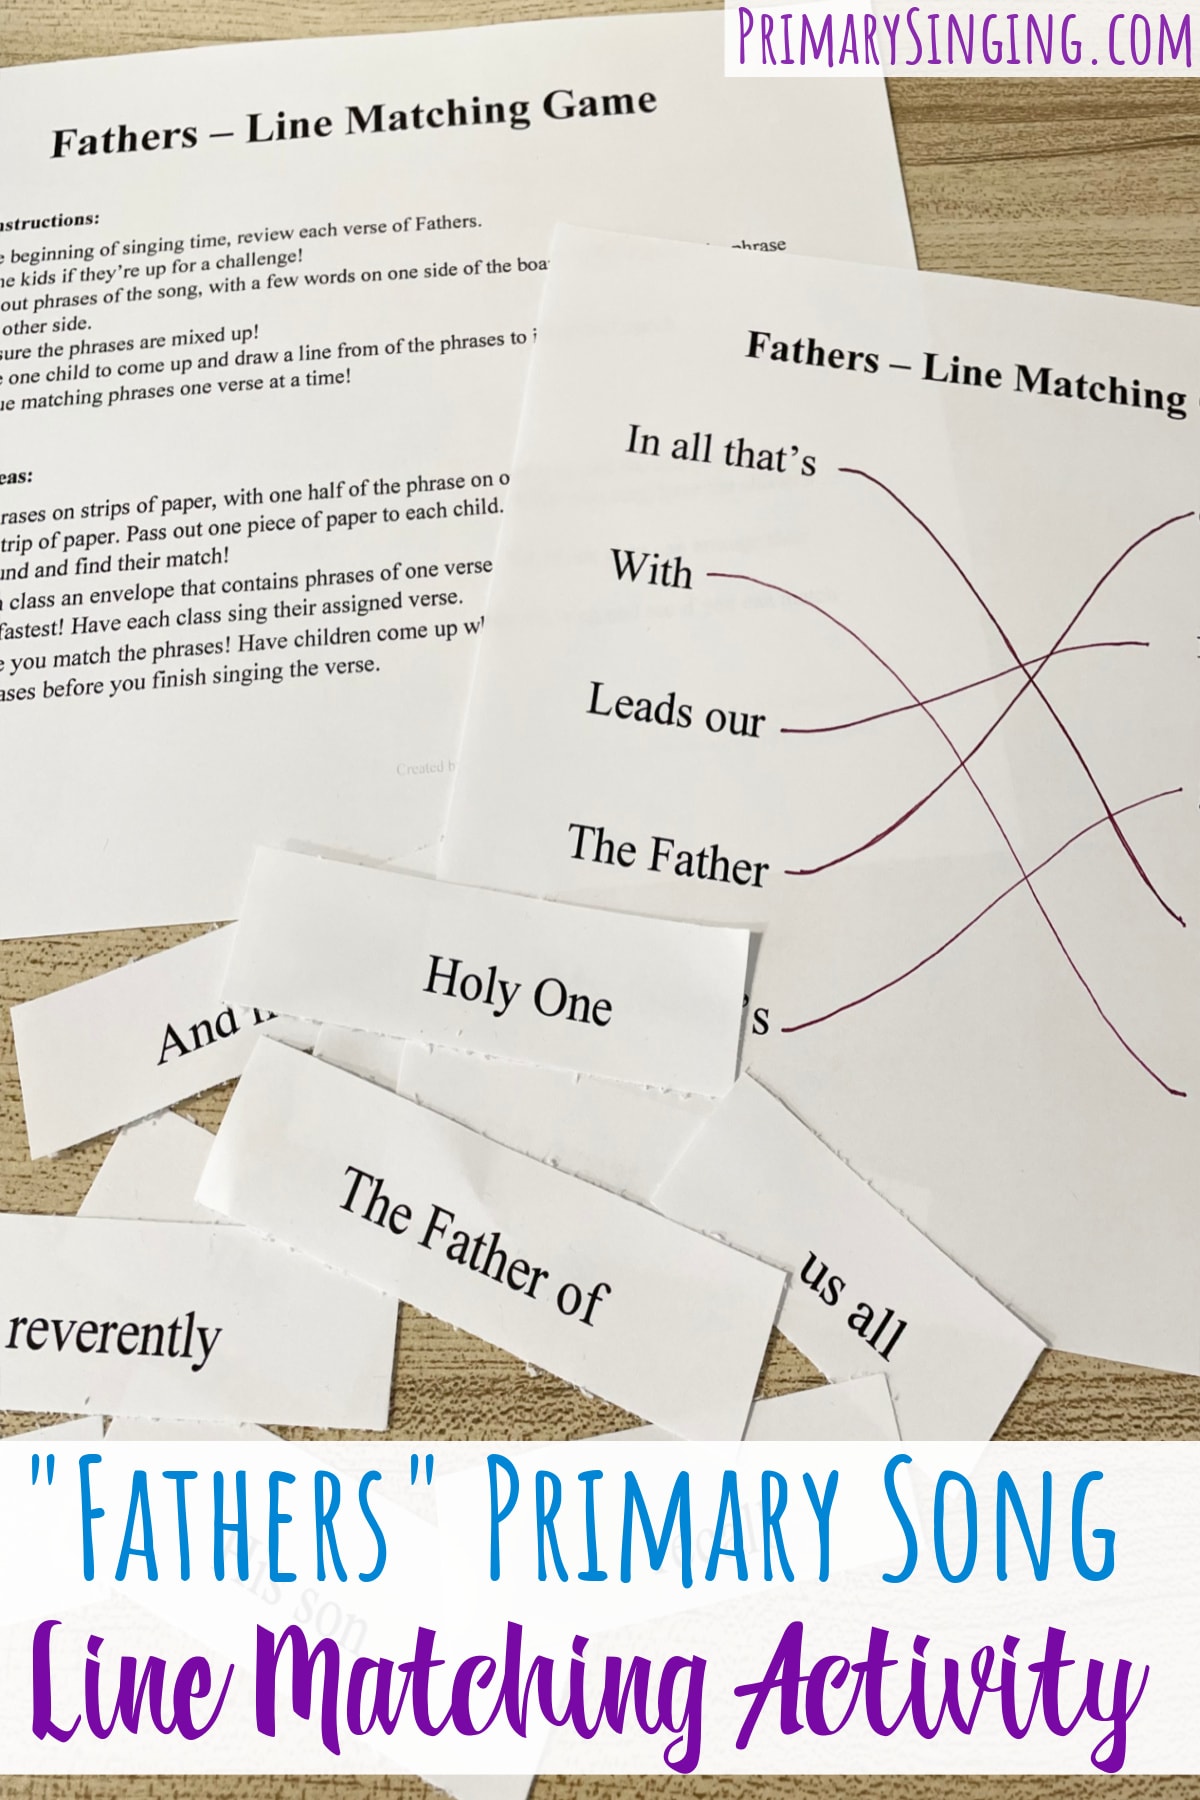 Fathers Line Matching Game Easy ideas for Music Leaders Fathers Primary Line Matching Activity